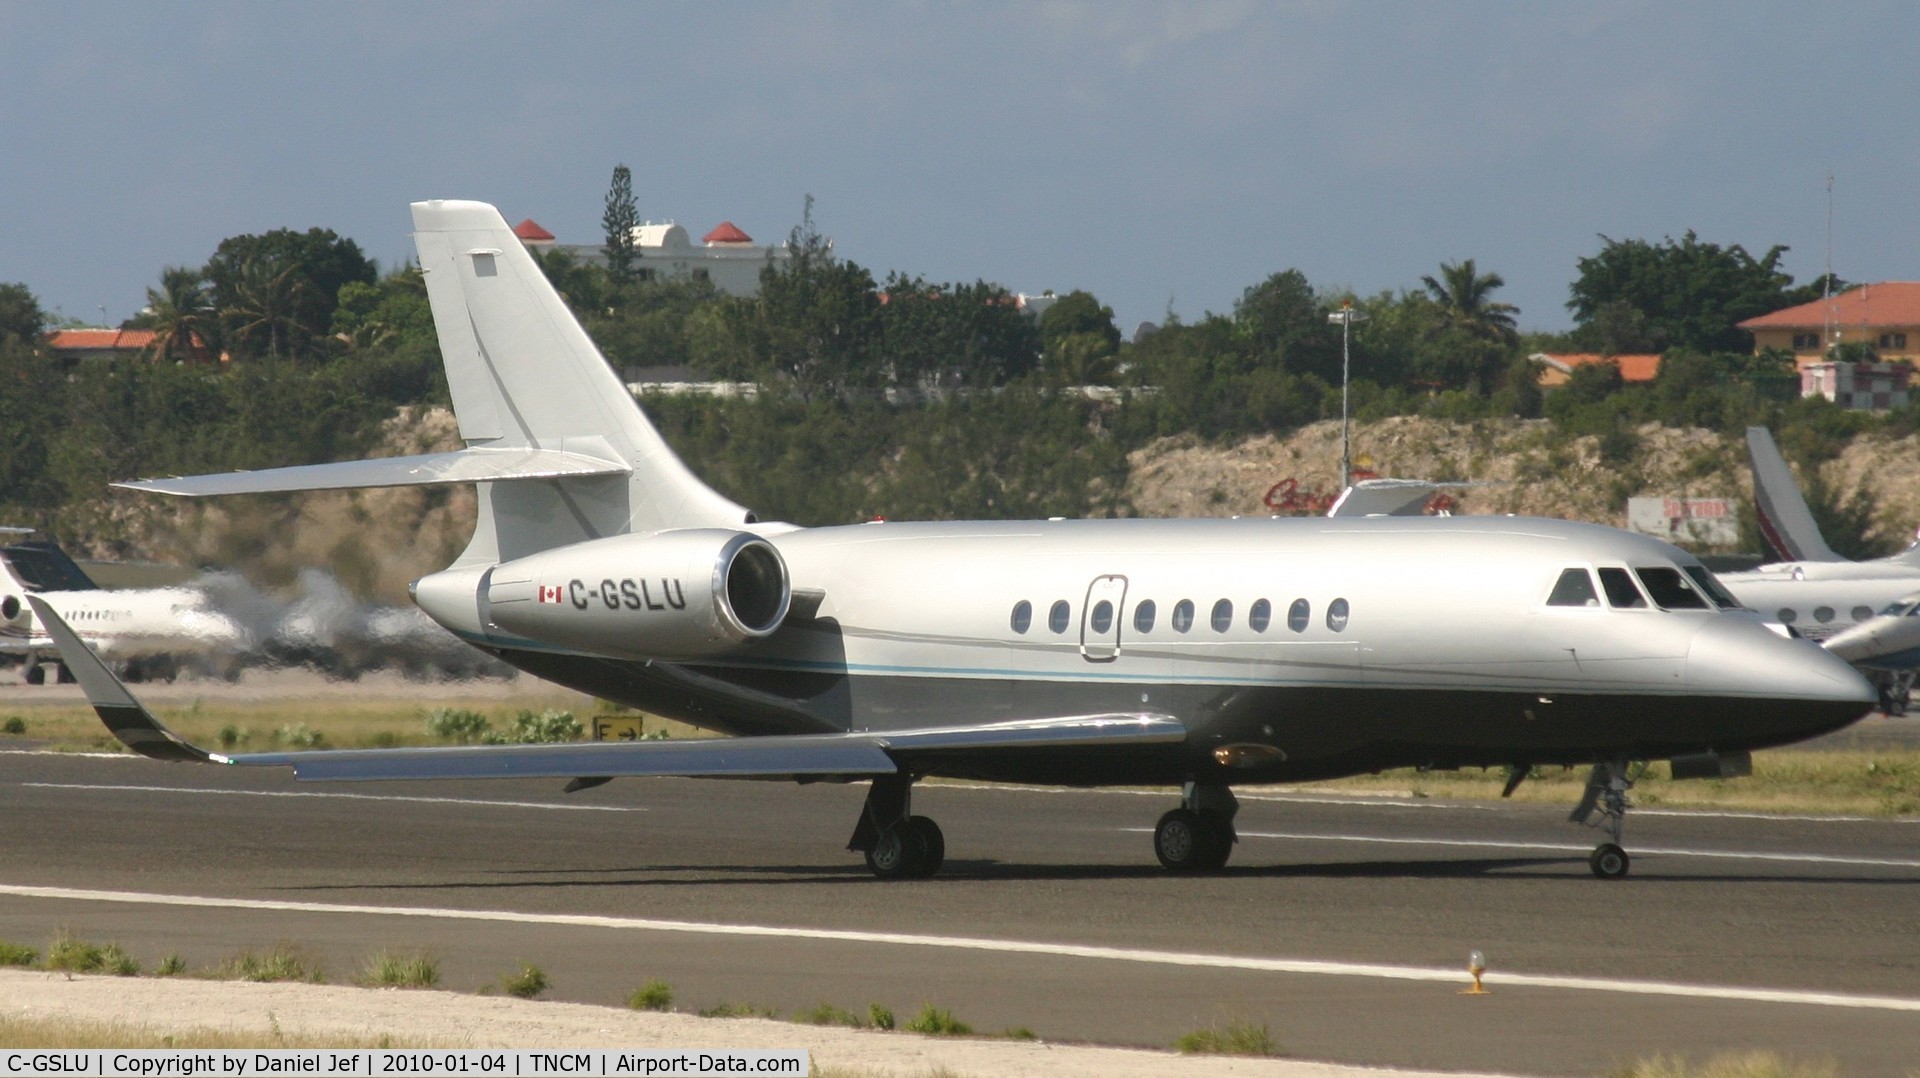 C-GSLU, 2008 Dassault Falcon 2000EX C/N 167, C-GSLU just landed at TNCM and prepping to back track